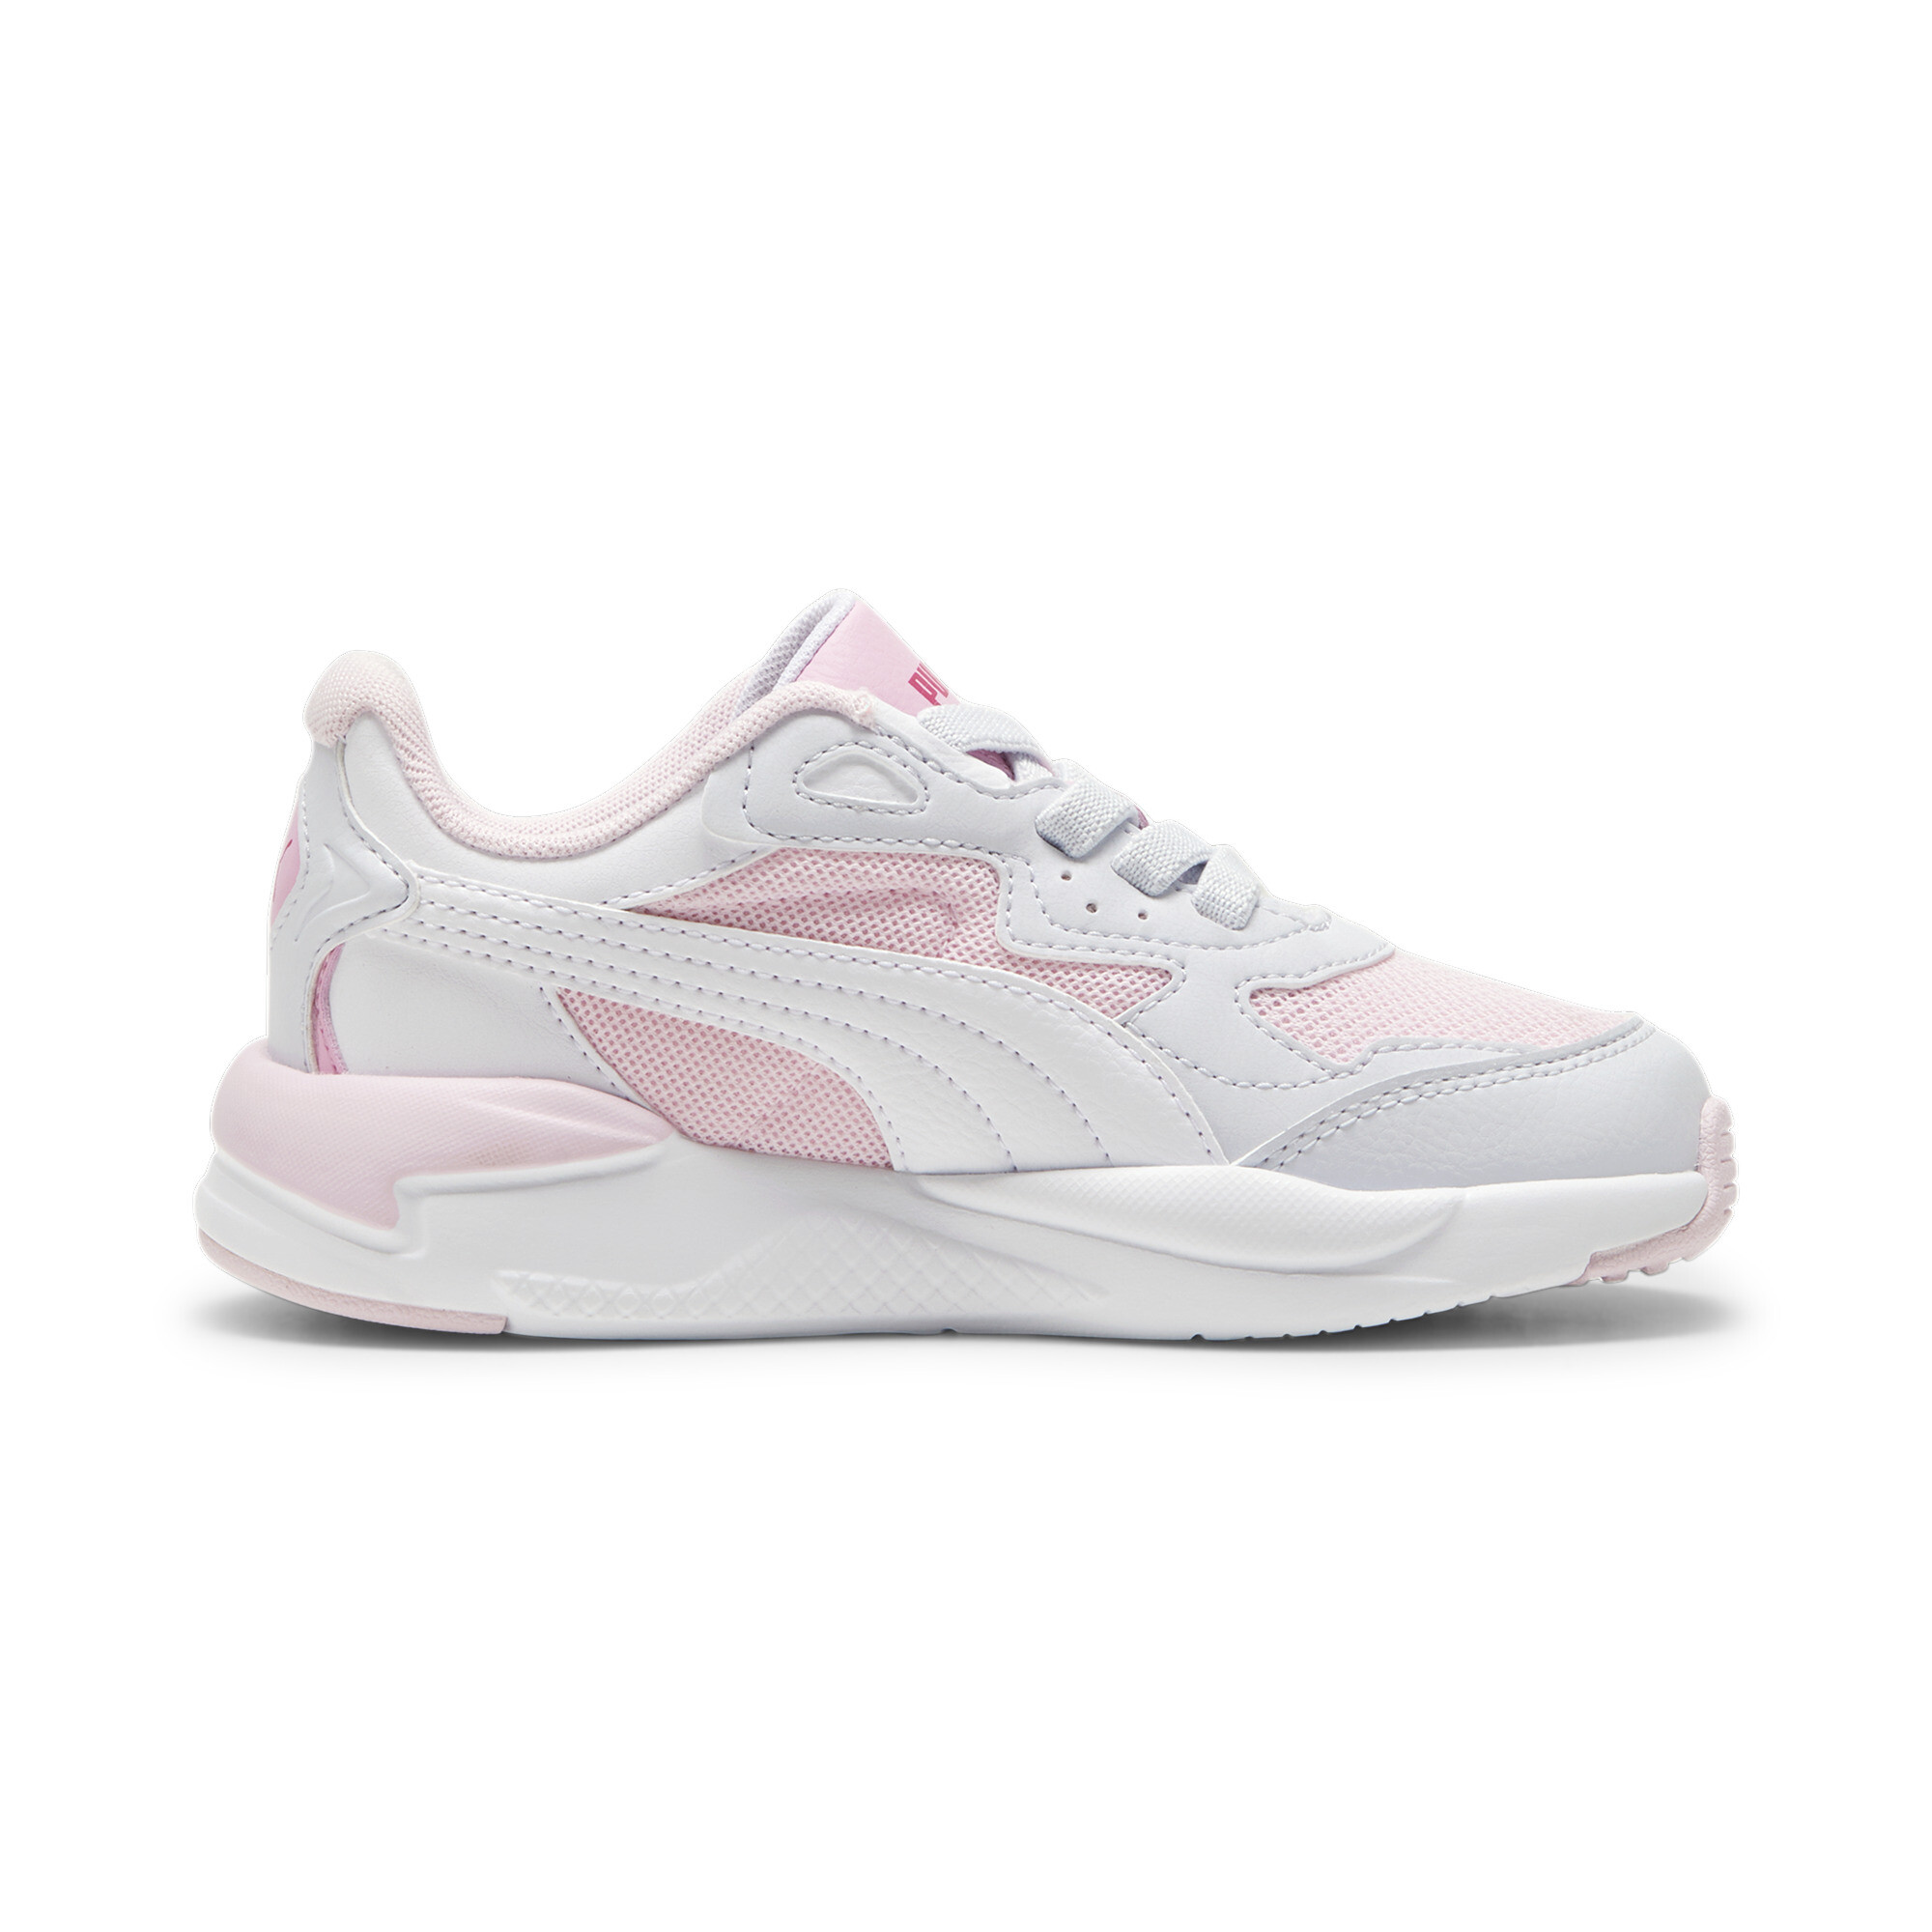 Puma X-Ray Speed AC Kids' Trainers, Pink, Size 32.5, Shoes